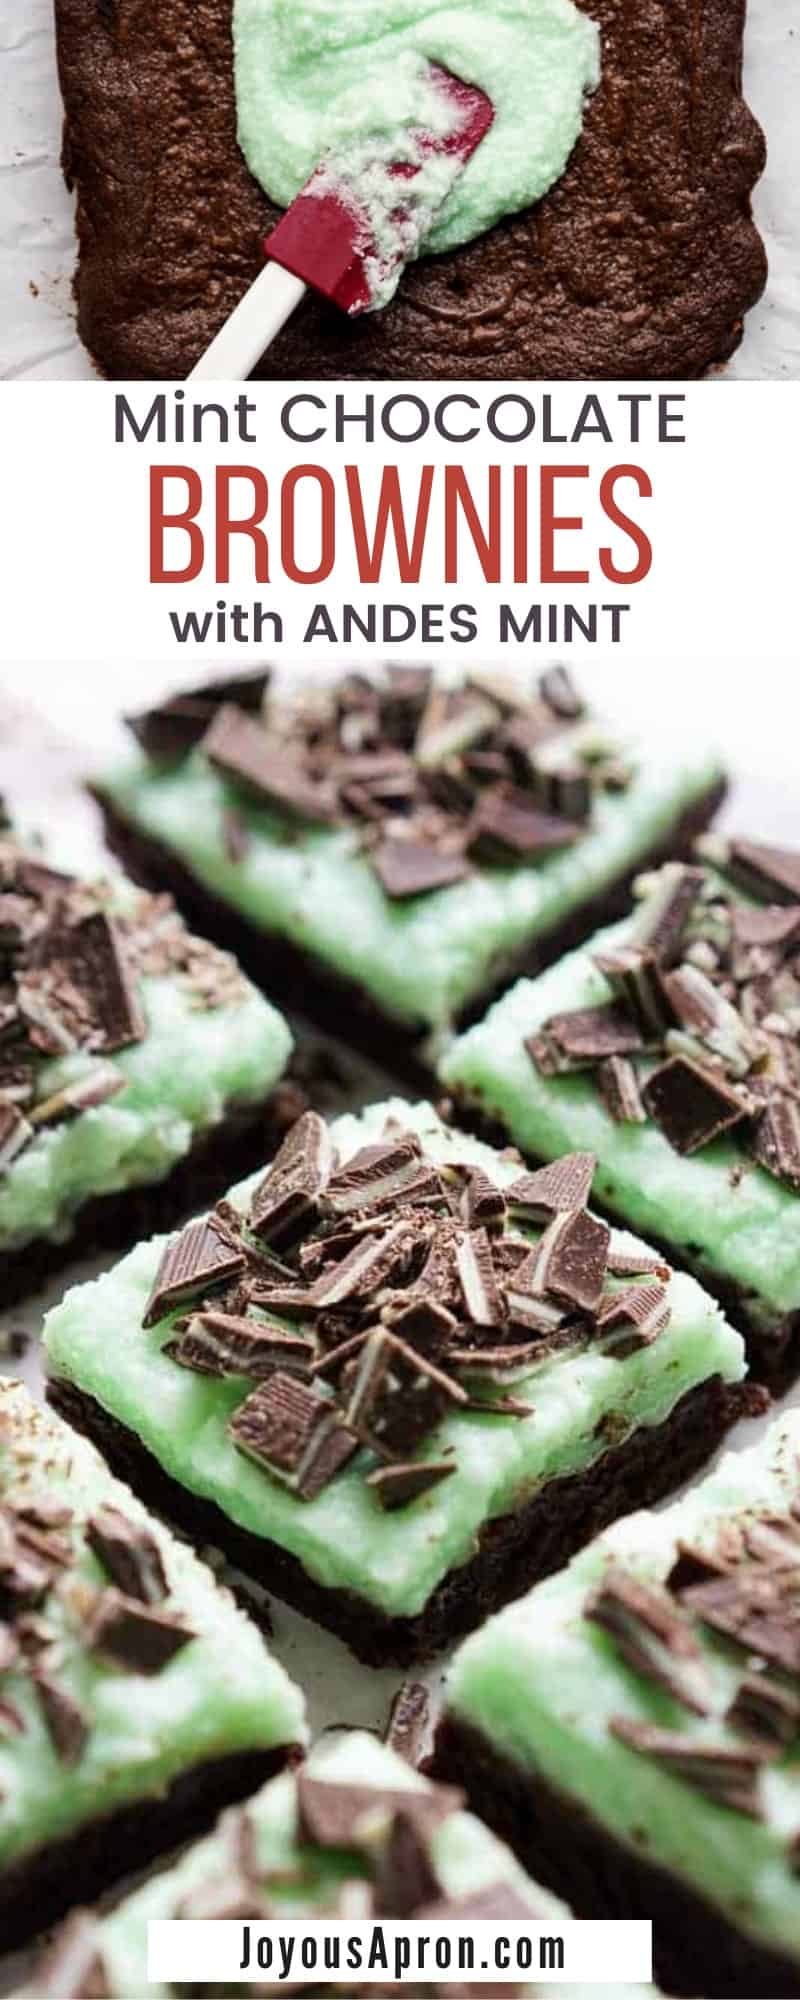 Mint Chocolate Brownies with Andes Mint - yummy minty sweets and dessert! Perfect for St Patricks Day, Christmas and New Year Eve parties and potlucks, these festive bite size treats are the perfect finger food and snack for the season! via @joyousapron